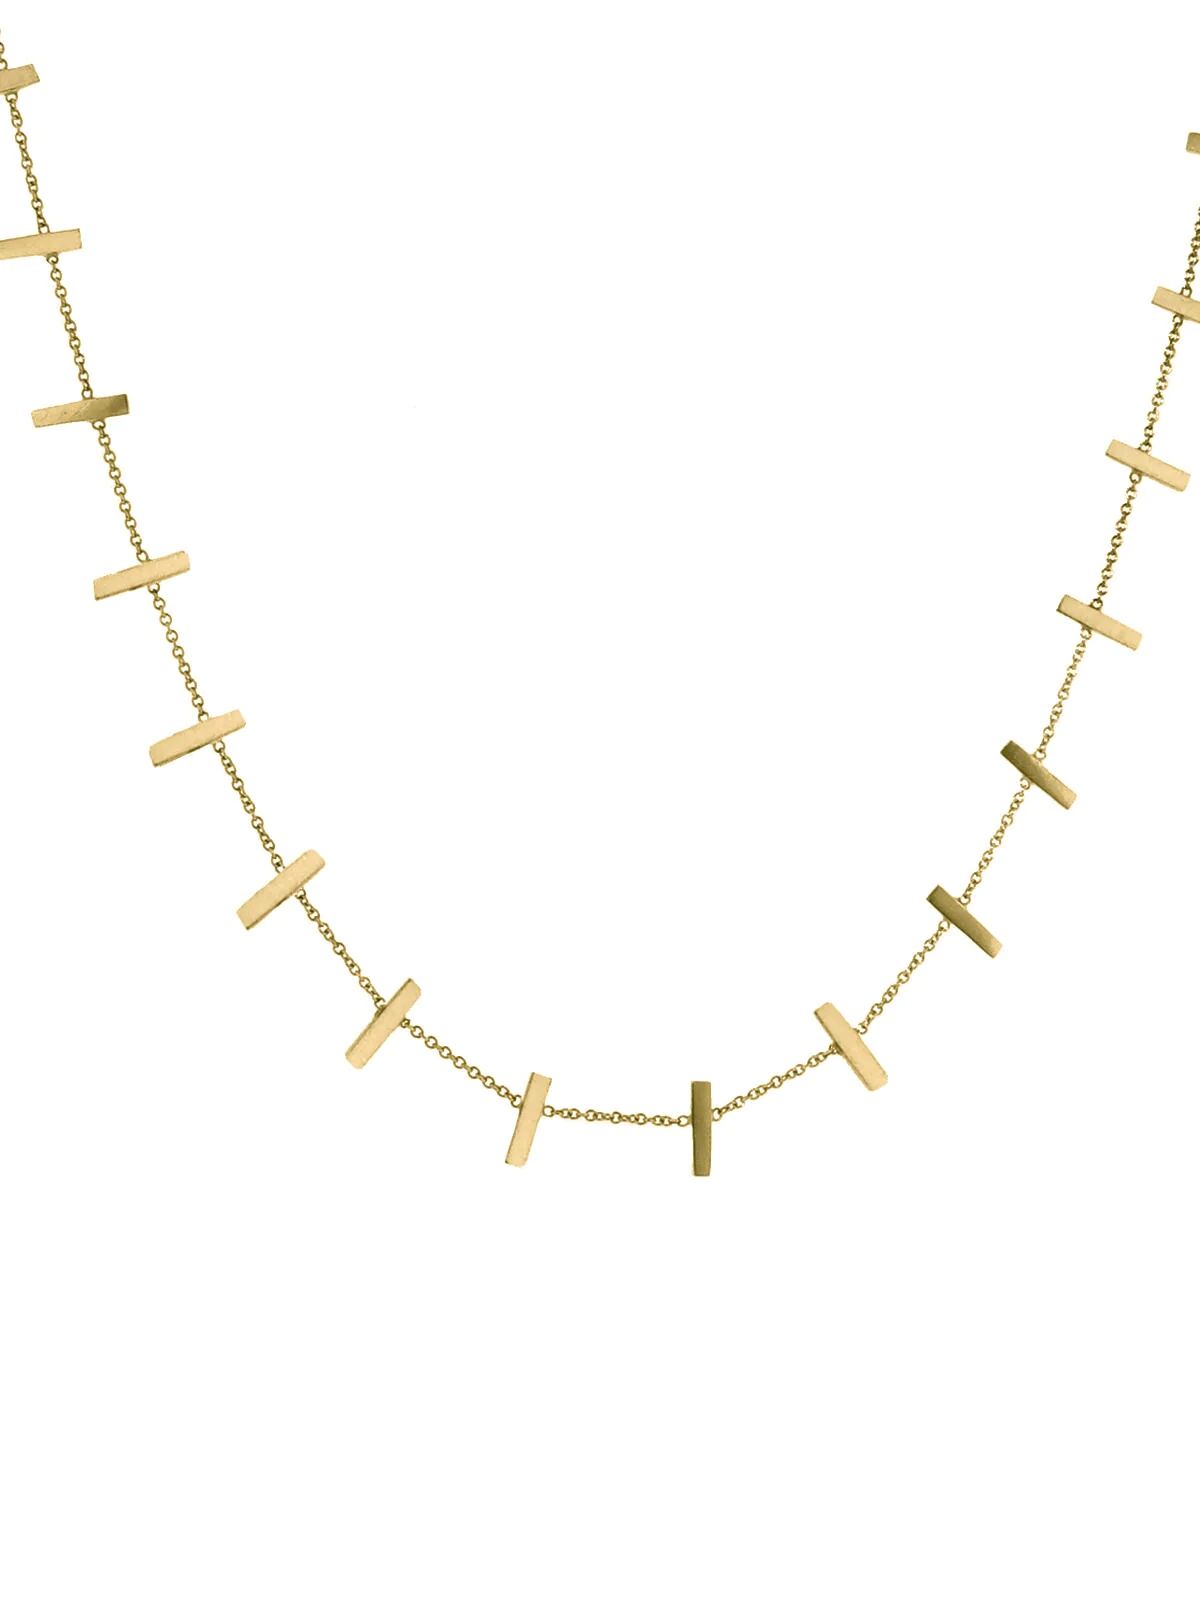 Cross Bar Chain Yellow Gold Necklace | YLANG 23